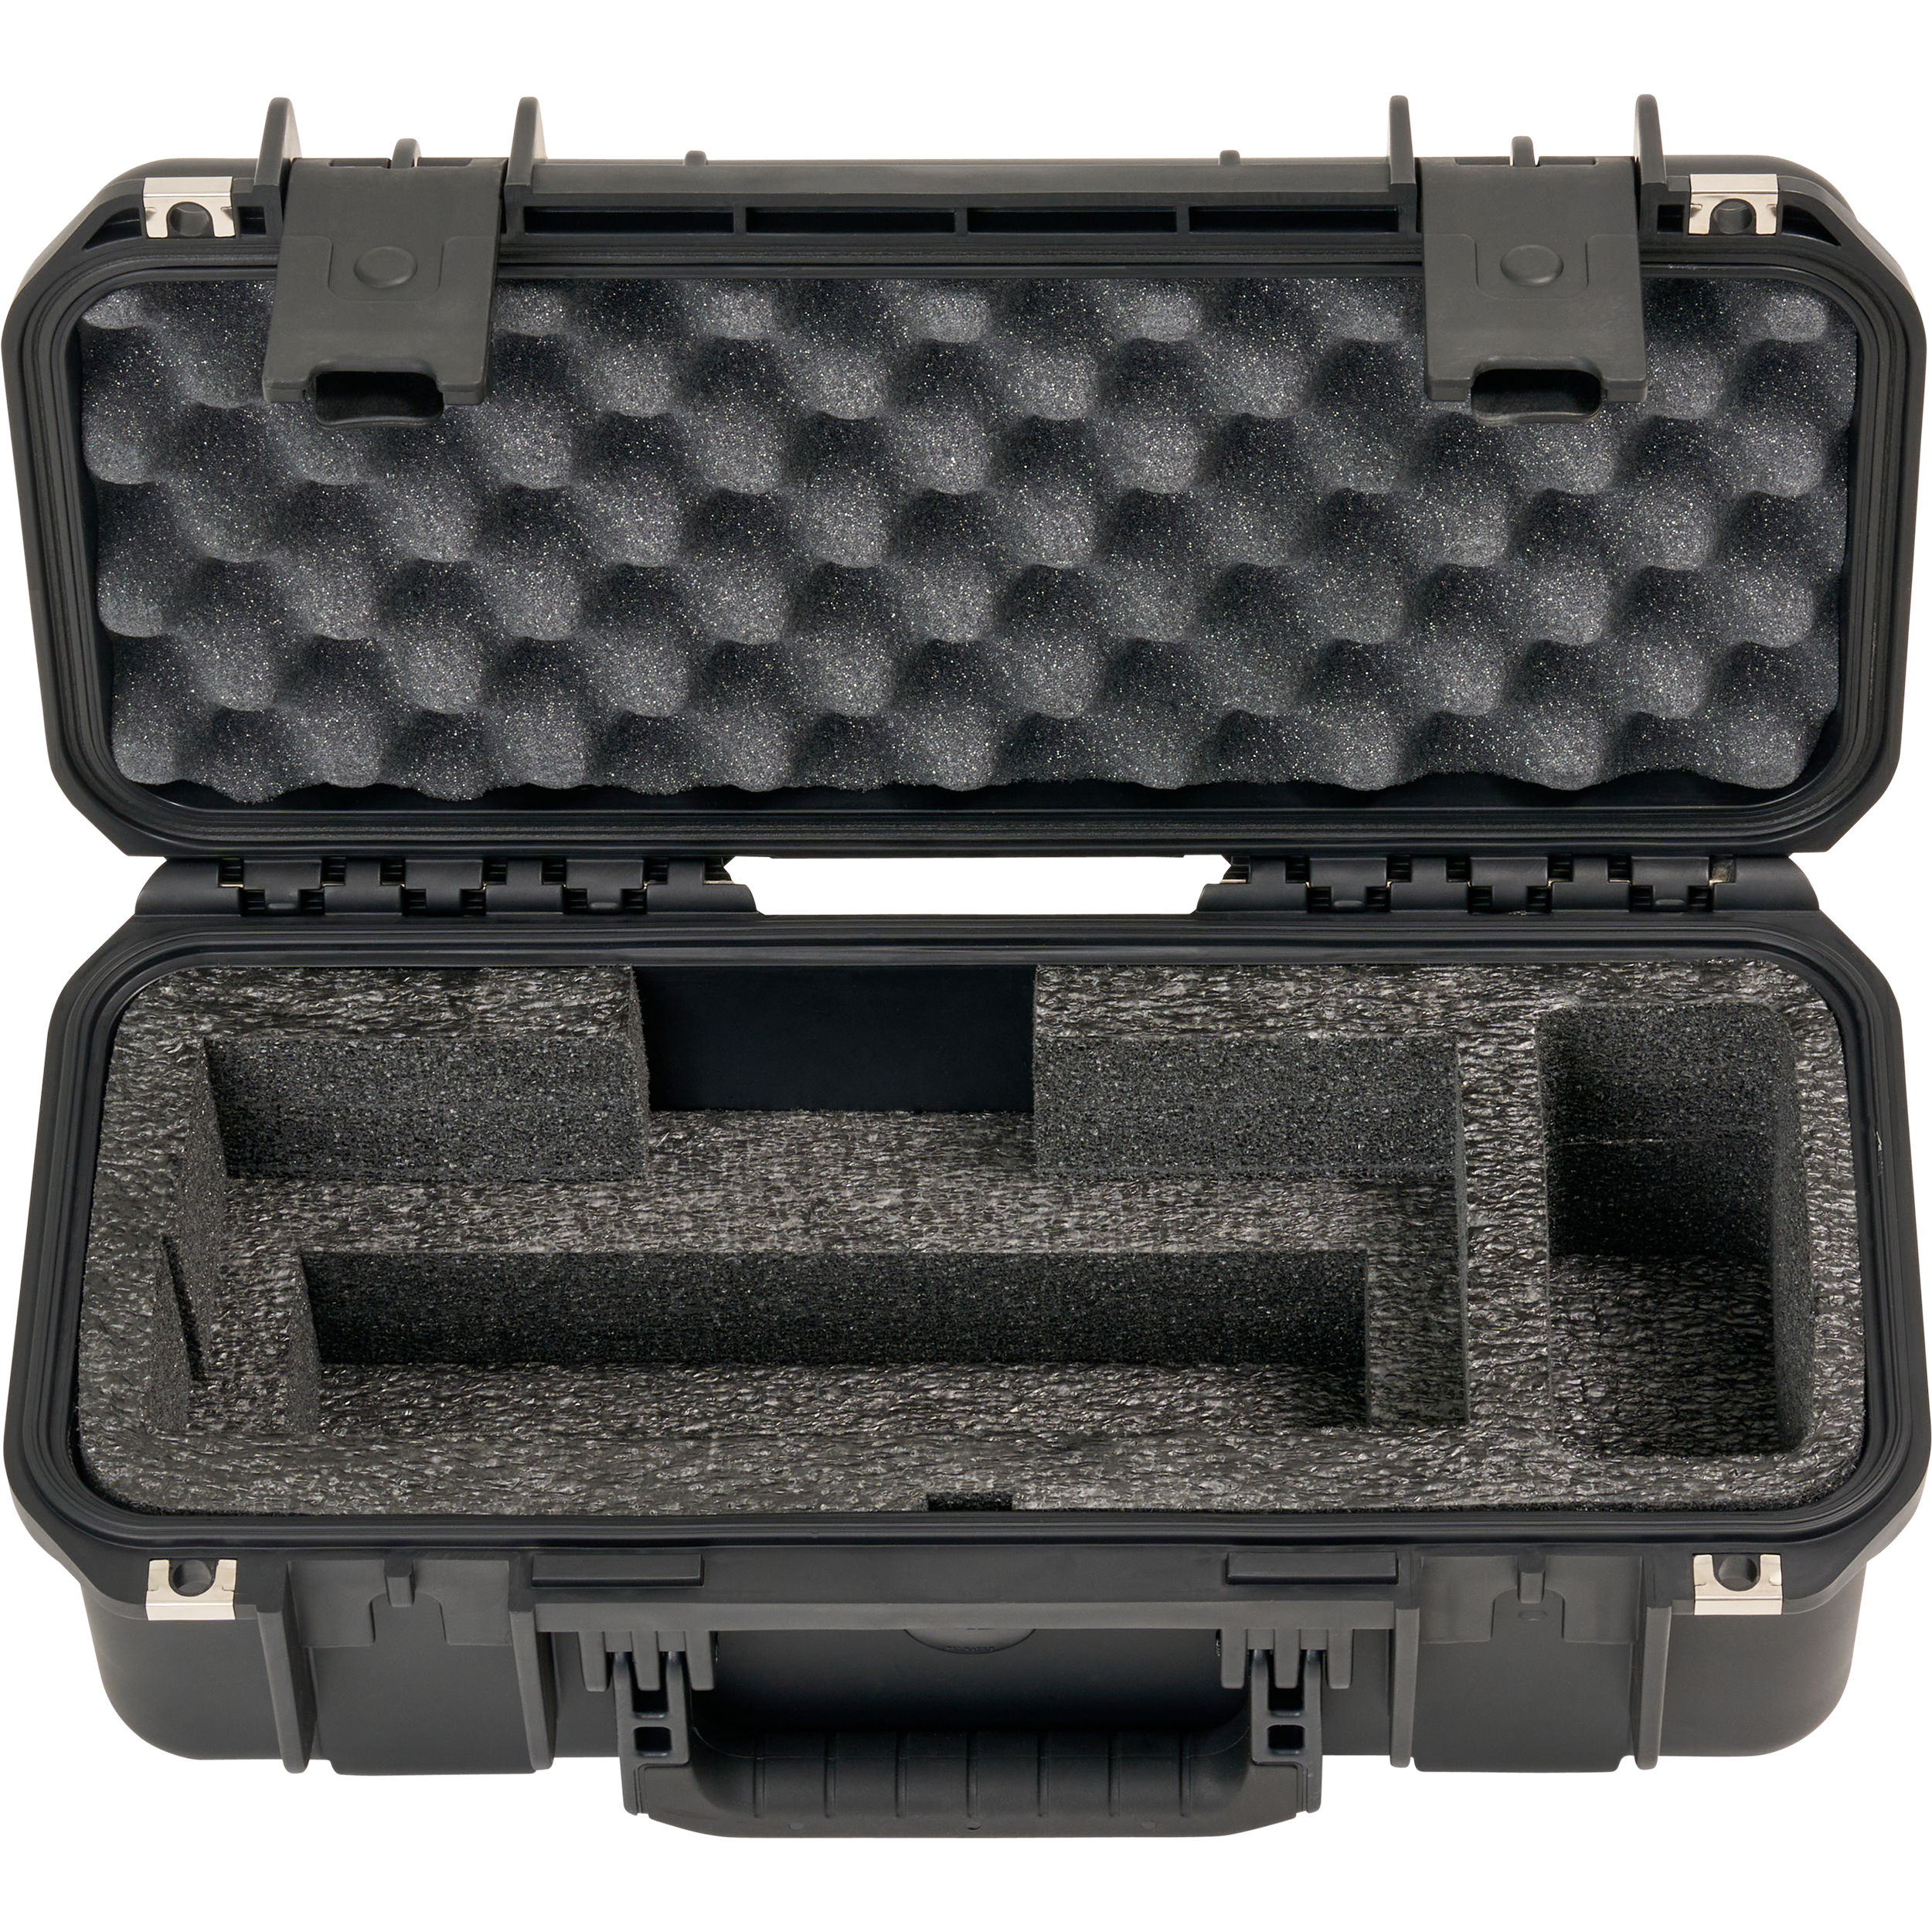 BYFP ipCase for Roland V-1HD+ Switcher